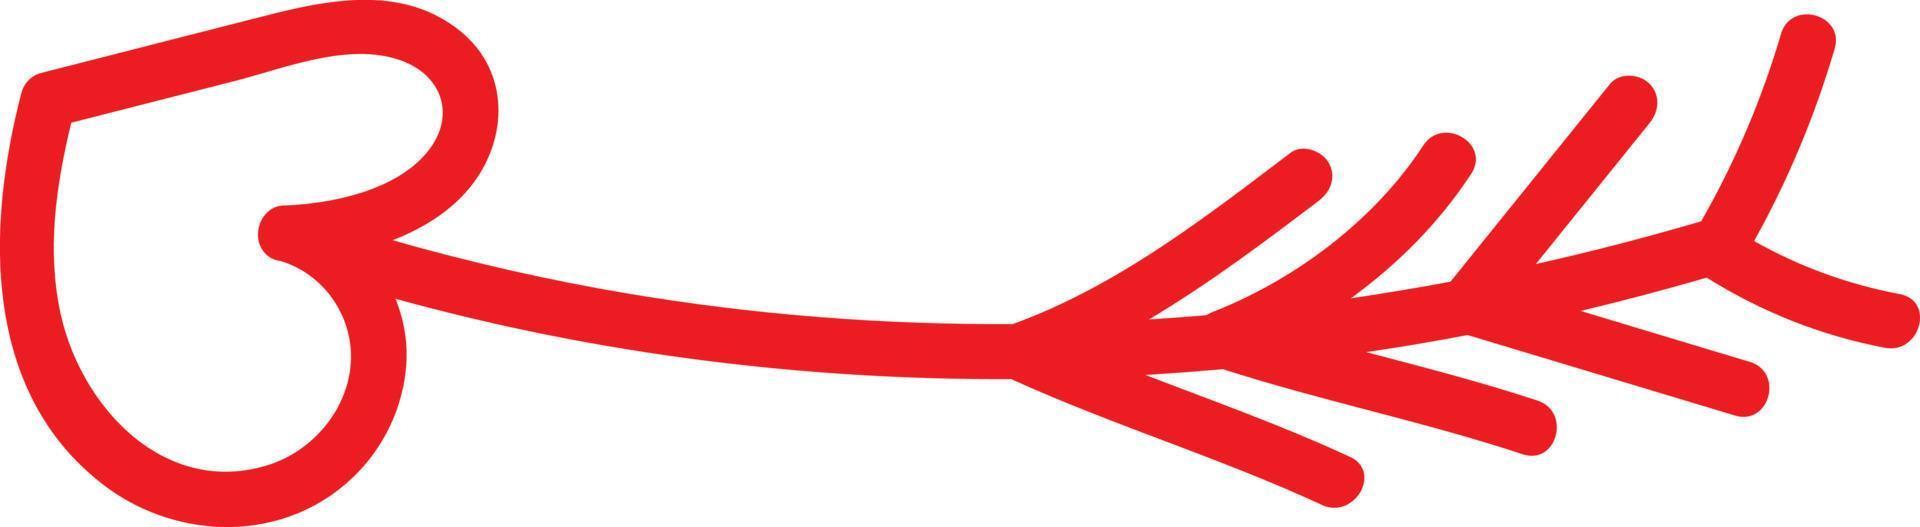 Red arrow with a heart shapped pointer , illustration, vector on white background.